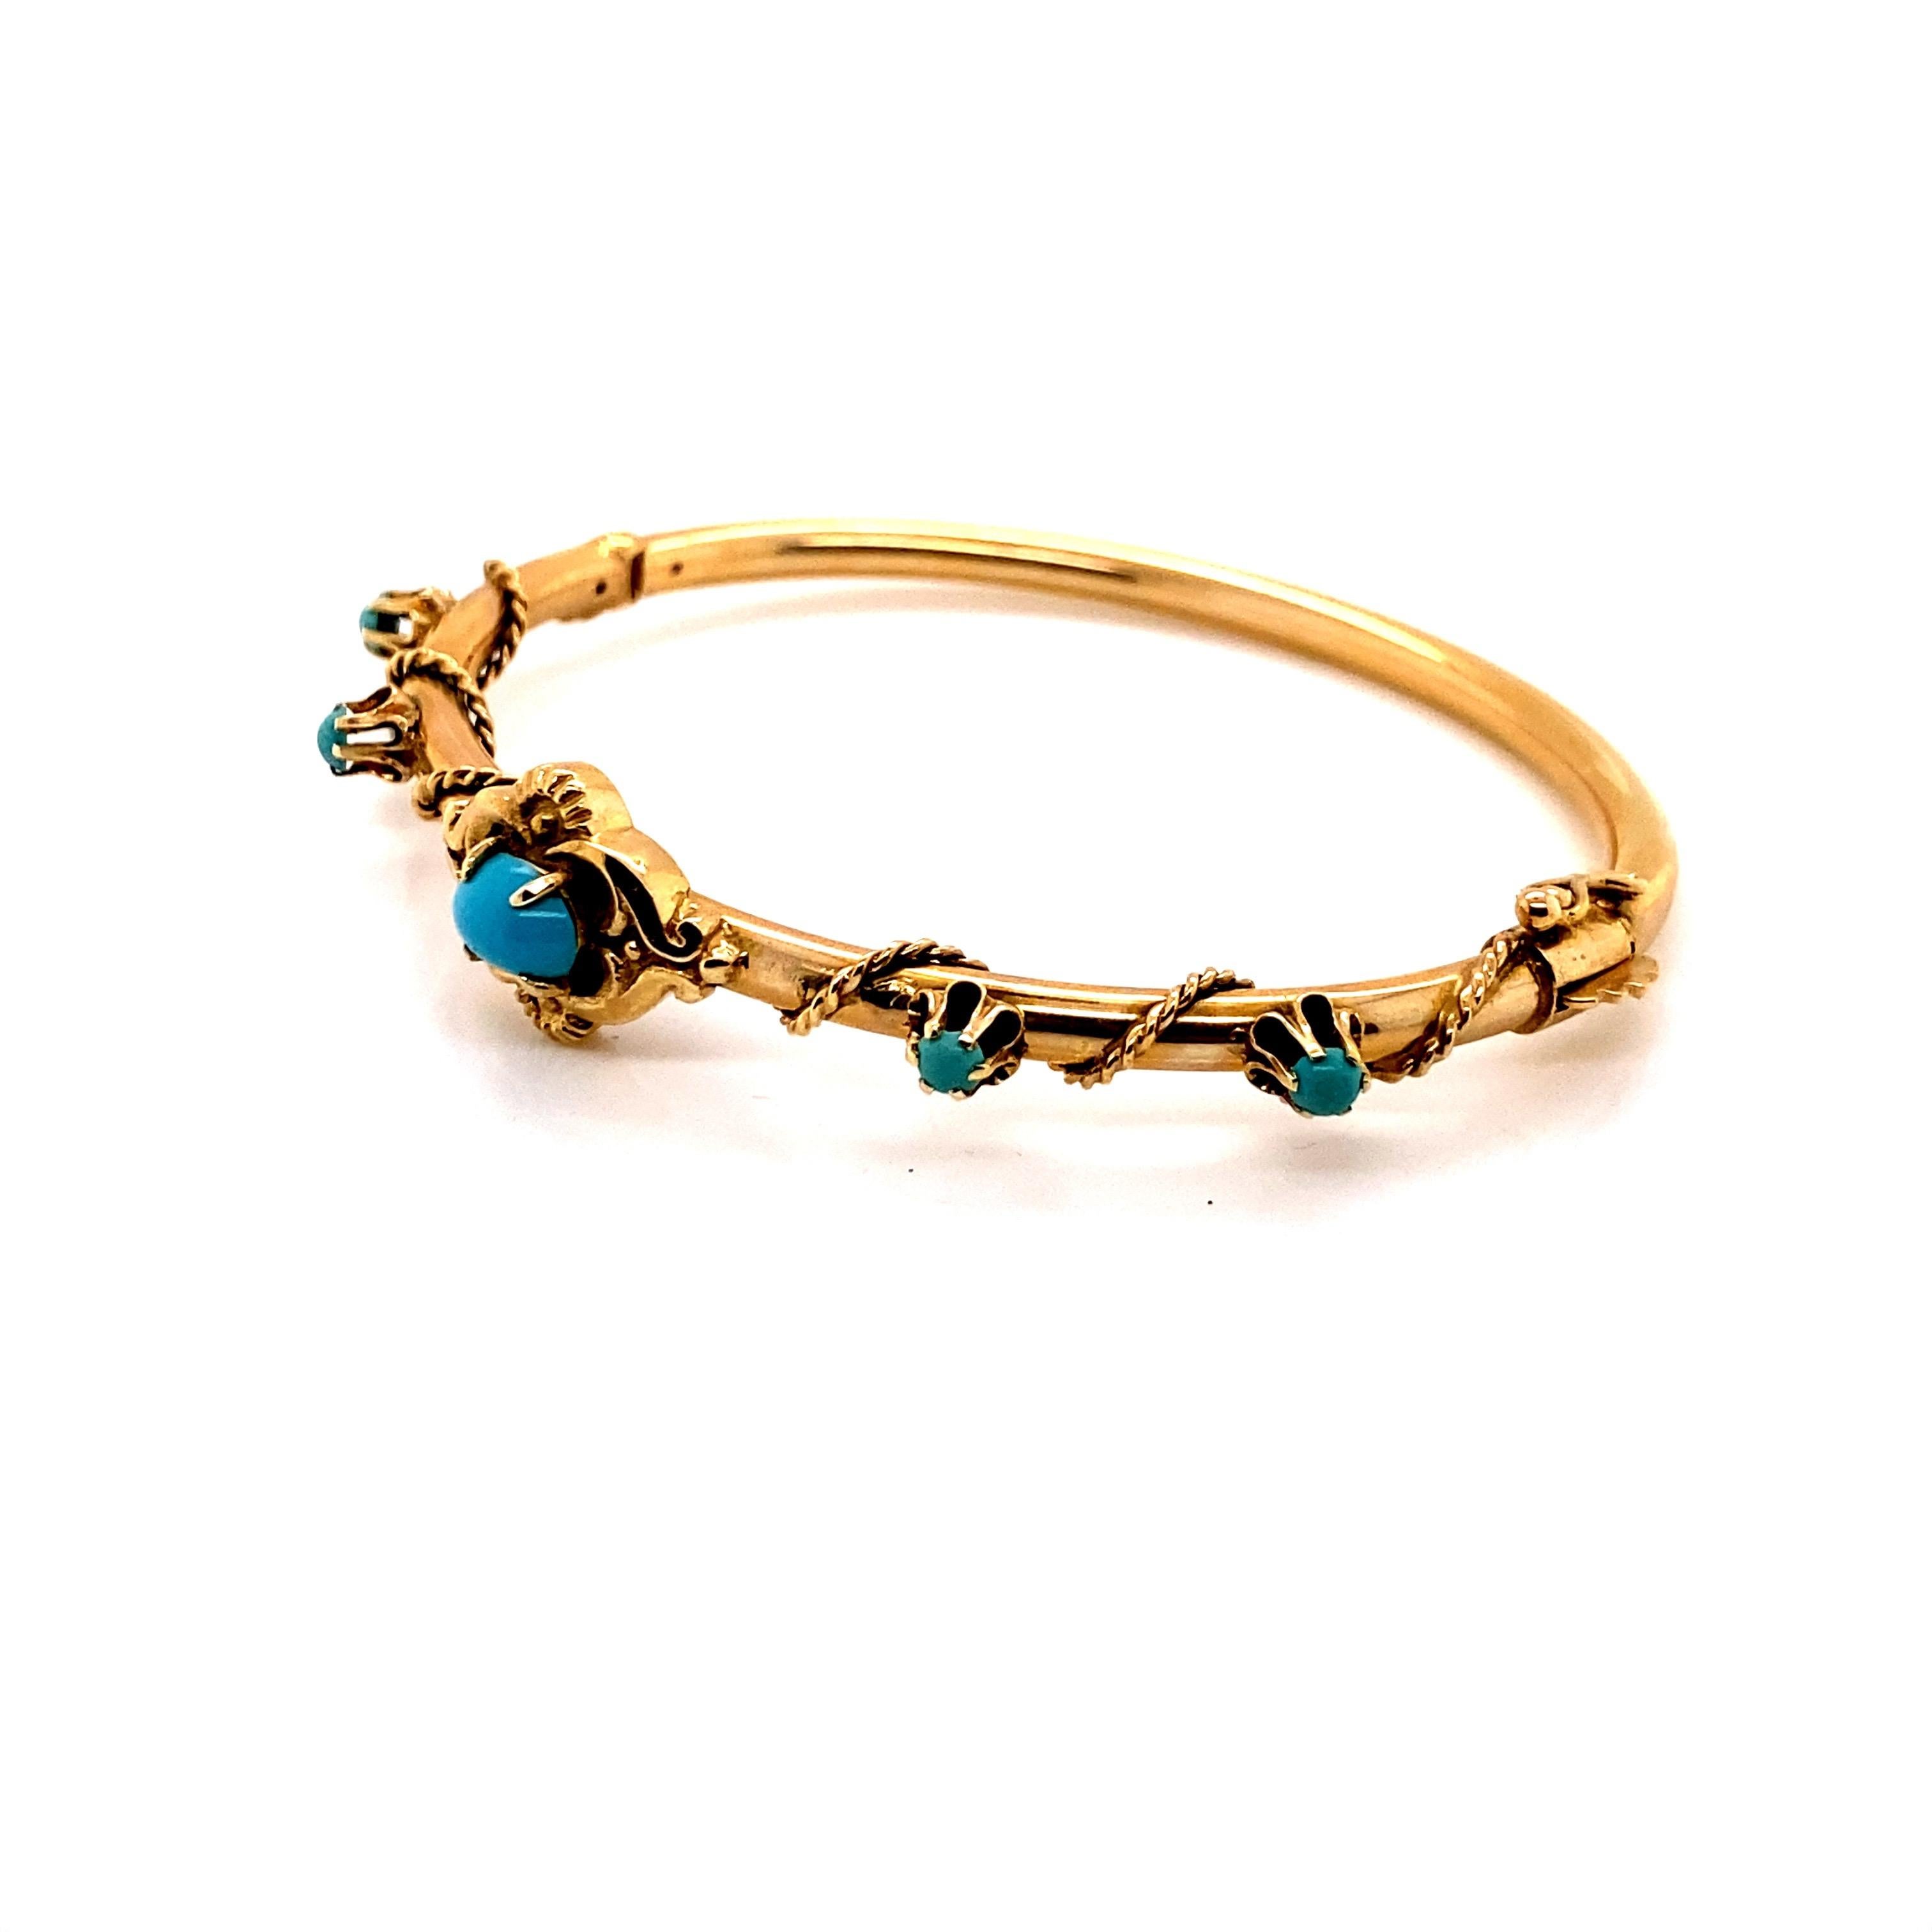 14K Yellow Gold Victorian Reproduction Bangle Bracelet with Turquoise - The oval turquoise measures 7x5mm and the 4 round turquoise measures 3mm. The width of the bangle measures 3.3mm. The inside diameter is 1.85 inches high and 2.25 inches wide.